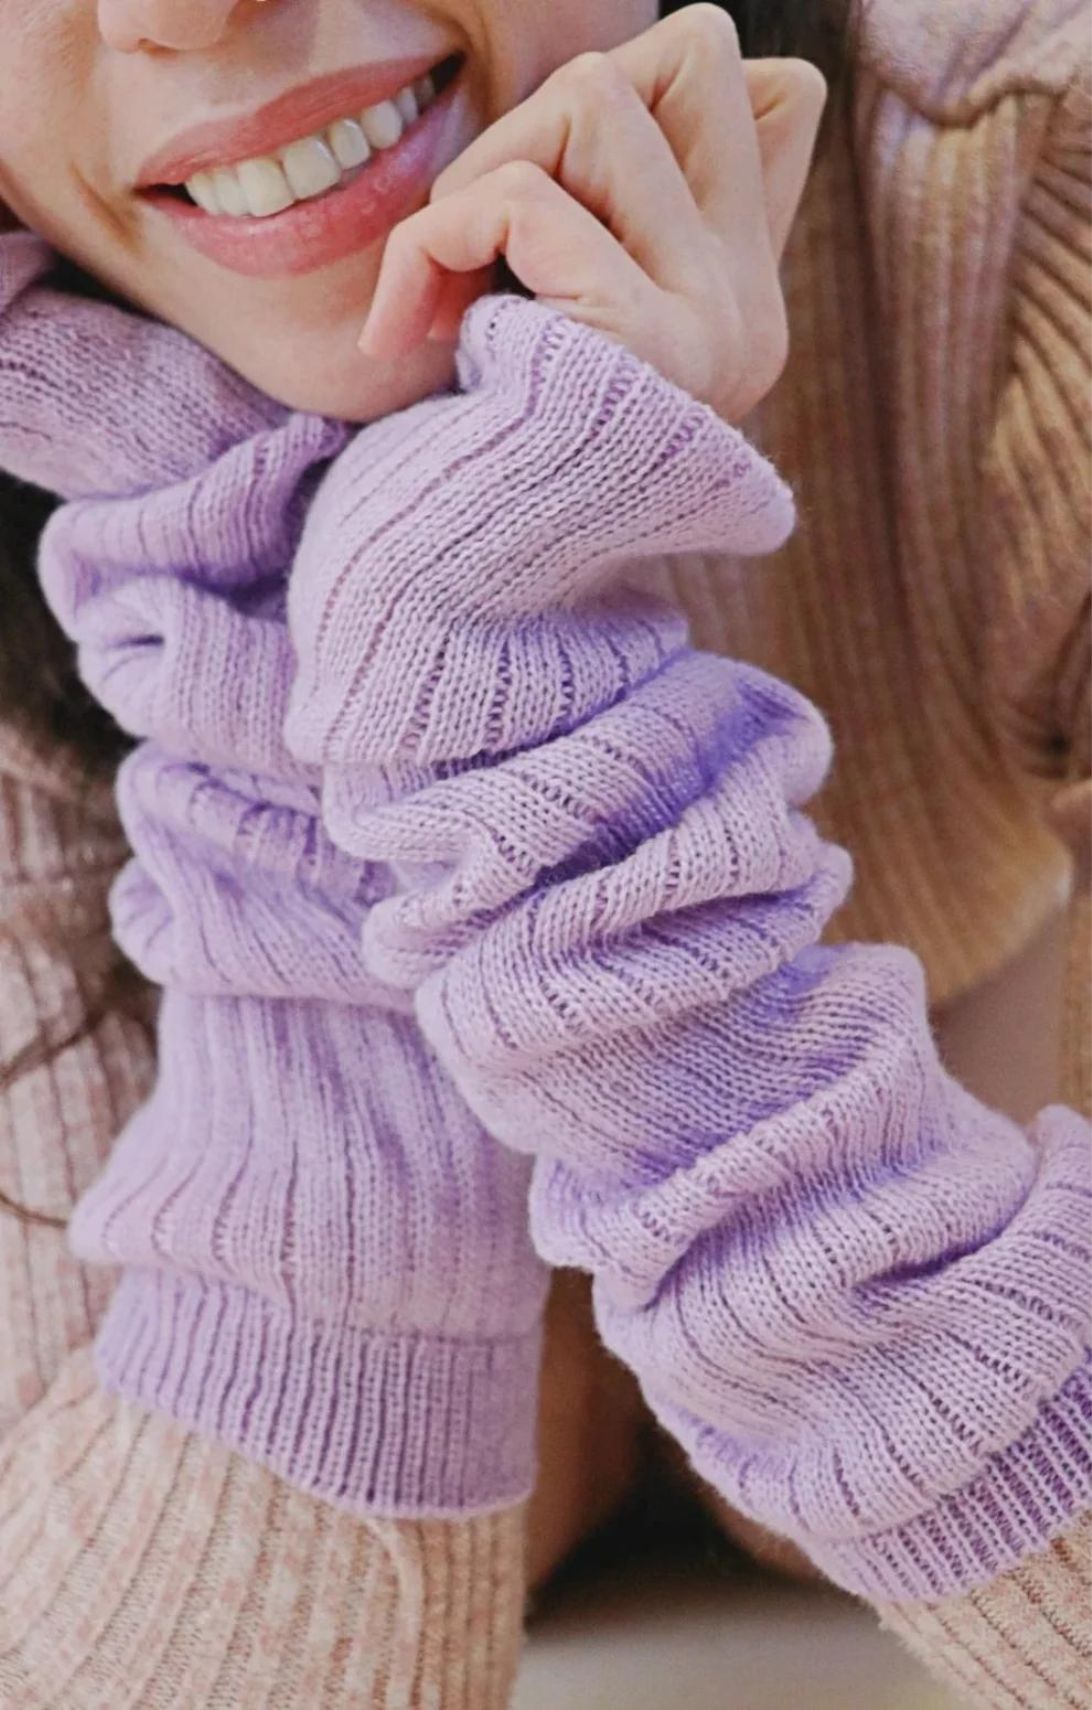 Woman's arm with ivory sweater wearing Lavender color of TABBISOCKS brand Wool Blend Leg and Arm Warmers